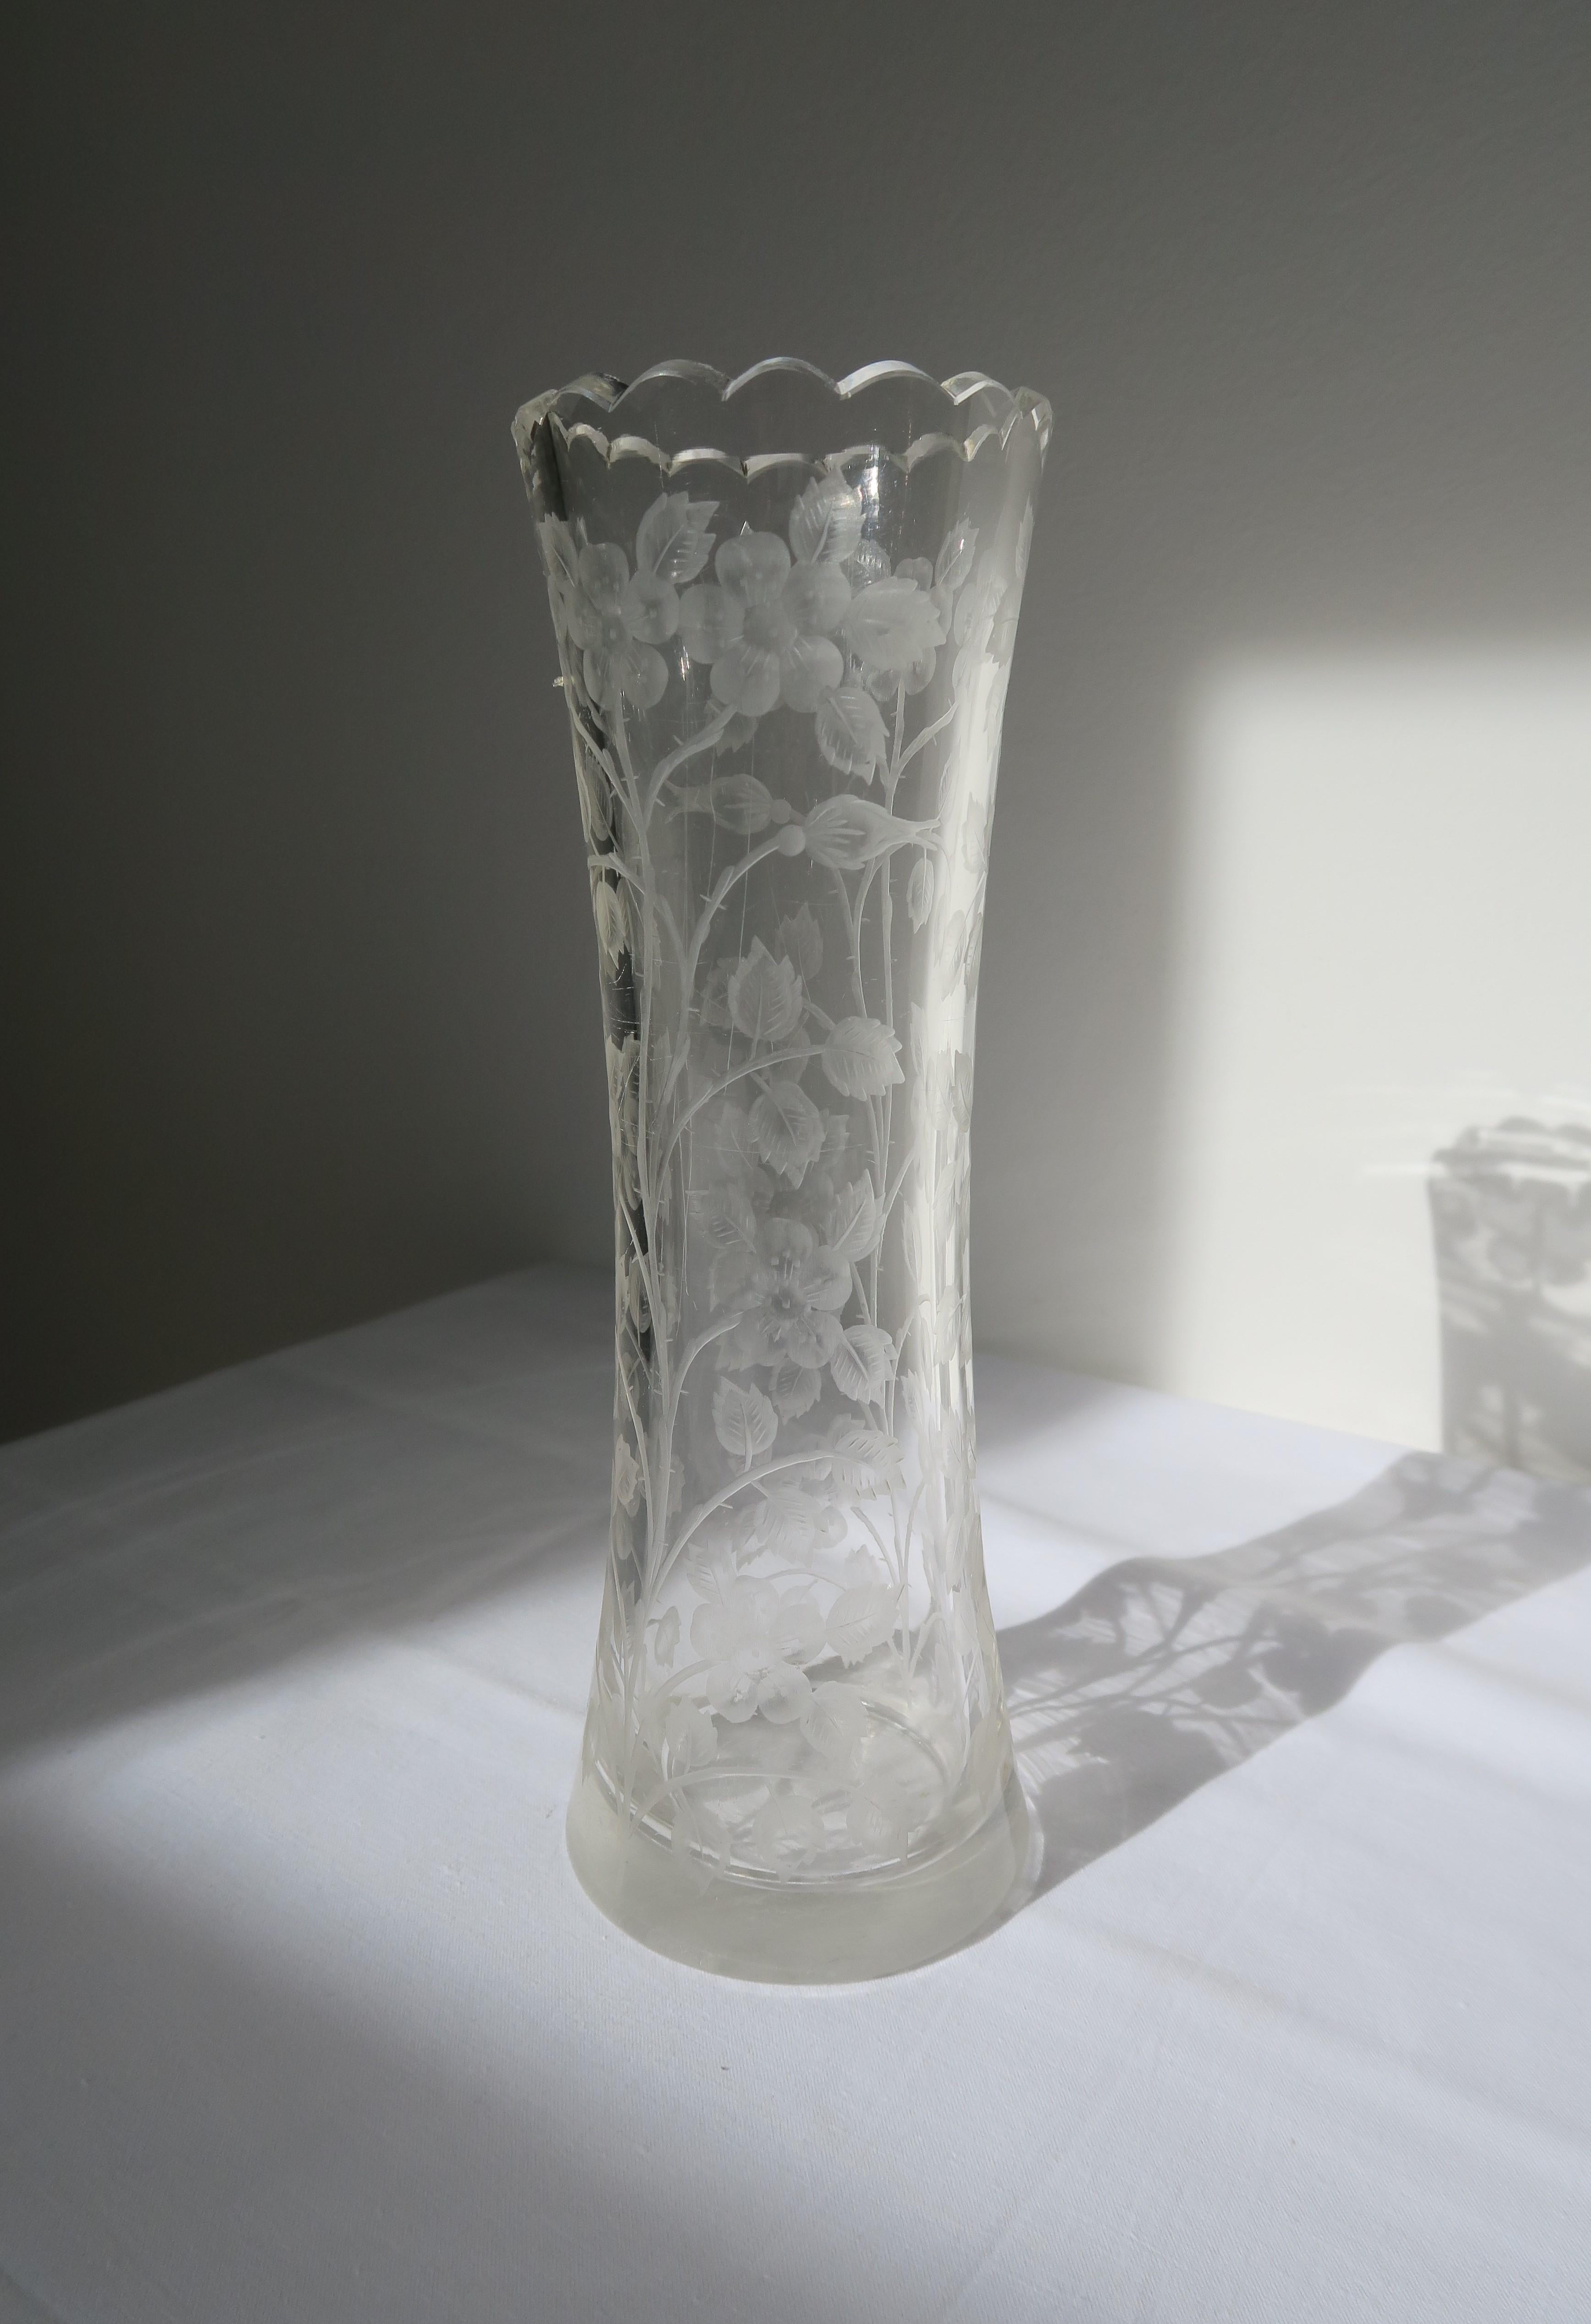 Original intricate cut glass vase by Moser Glassworks from ca. 1910-1920. Designed by renowned Karlovy Vary based designer Ludwig Moser it features a scalloped rim and beautiful rose design that has been cut into the glass catching the light in